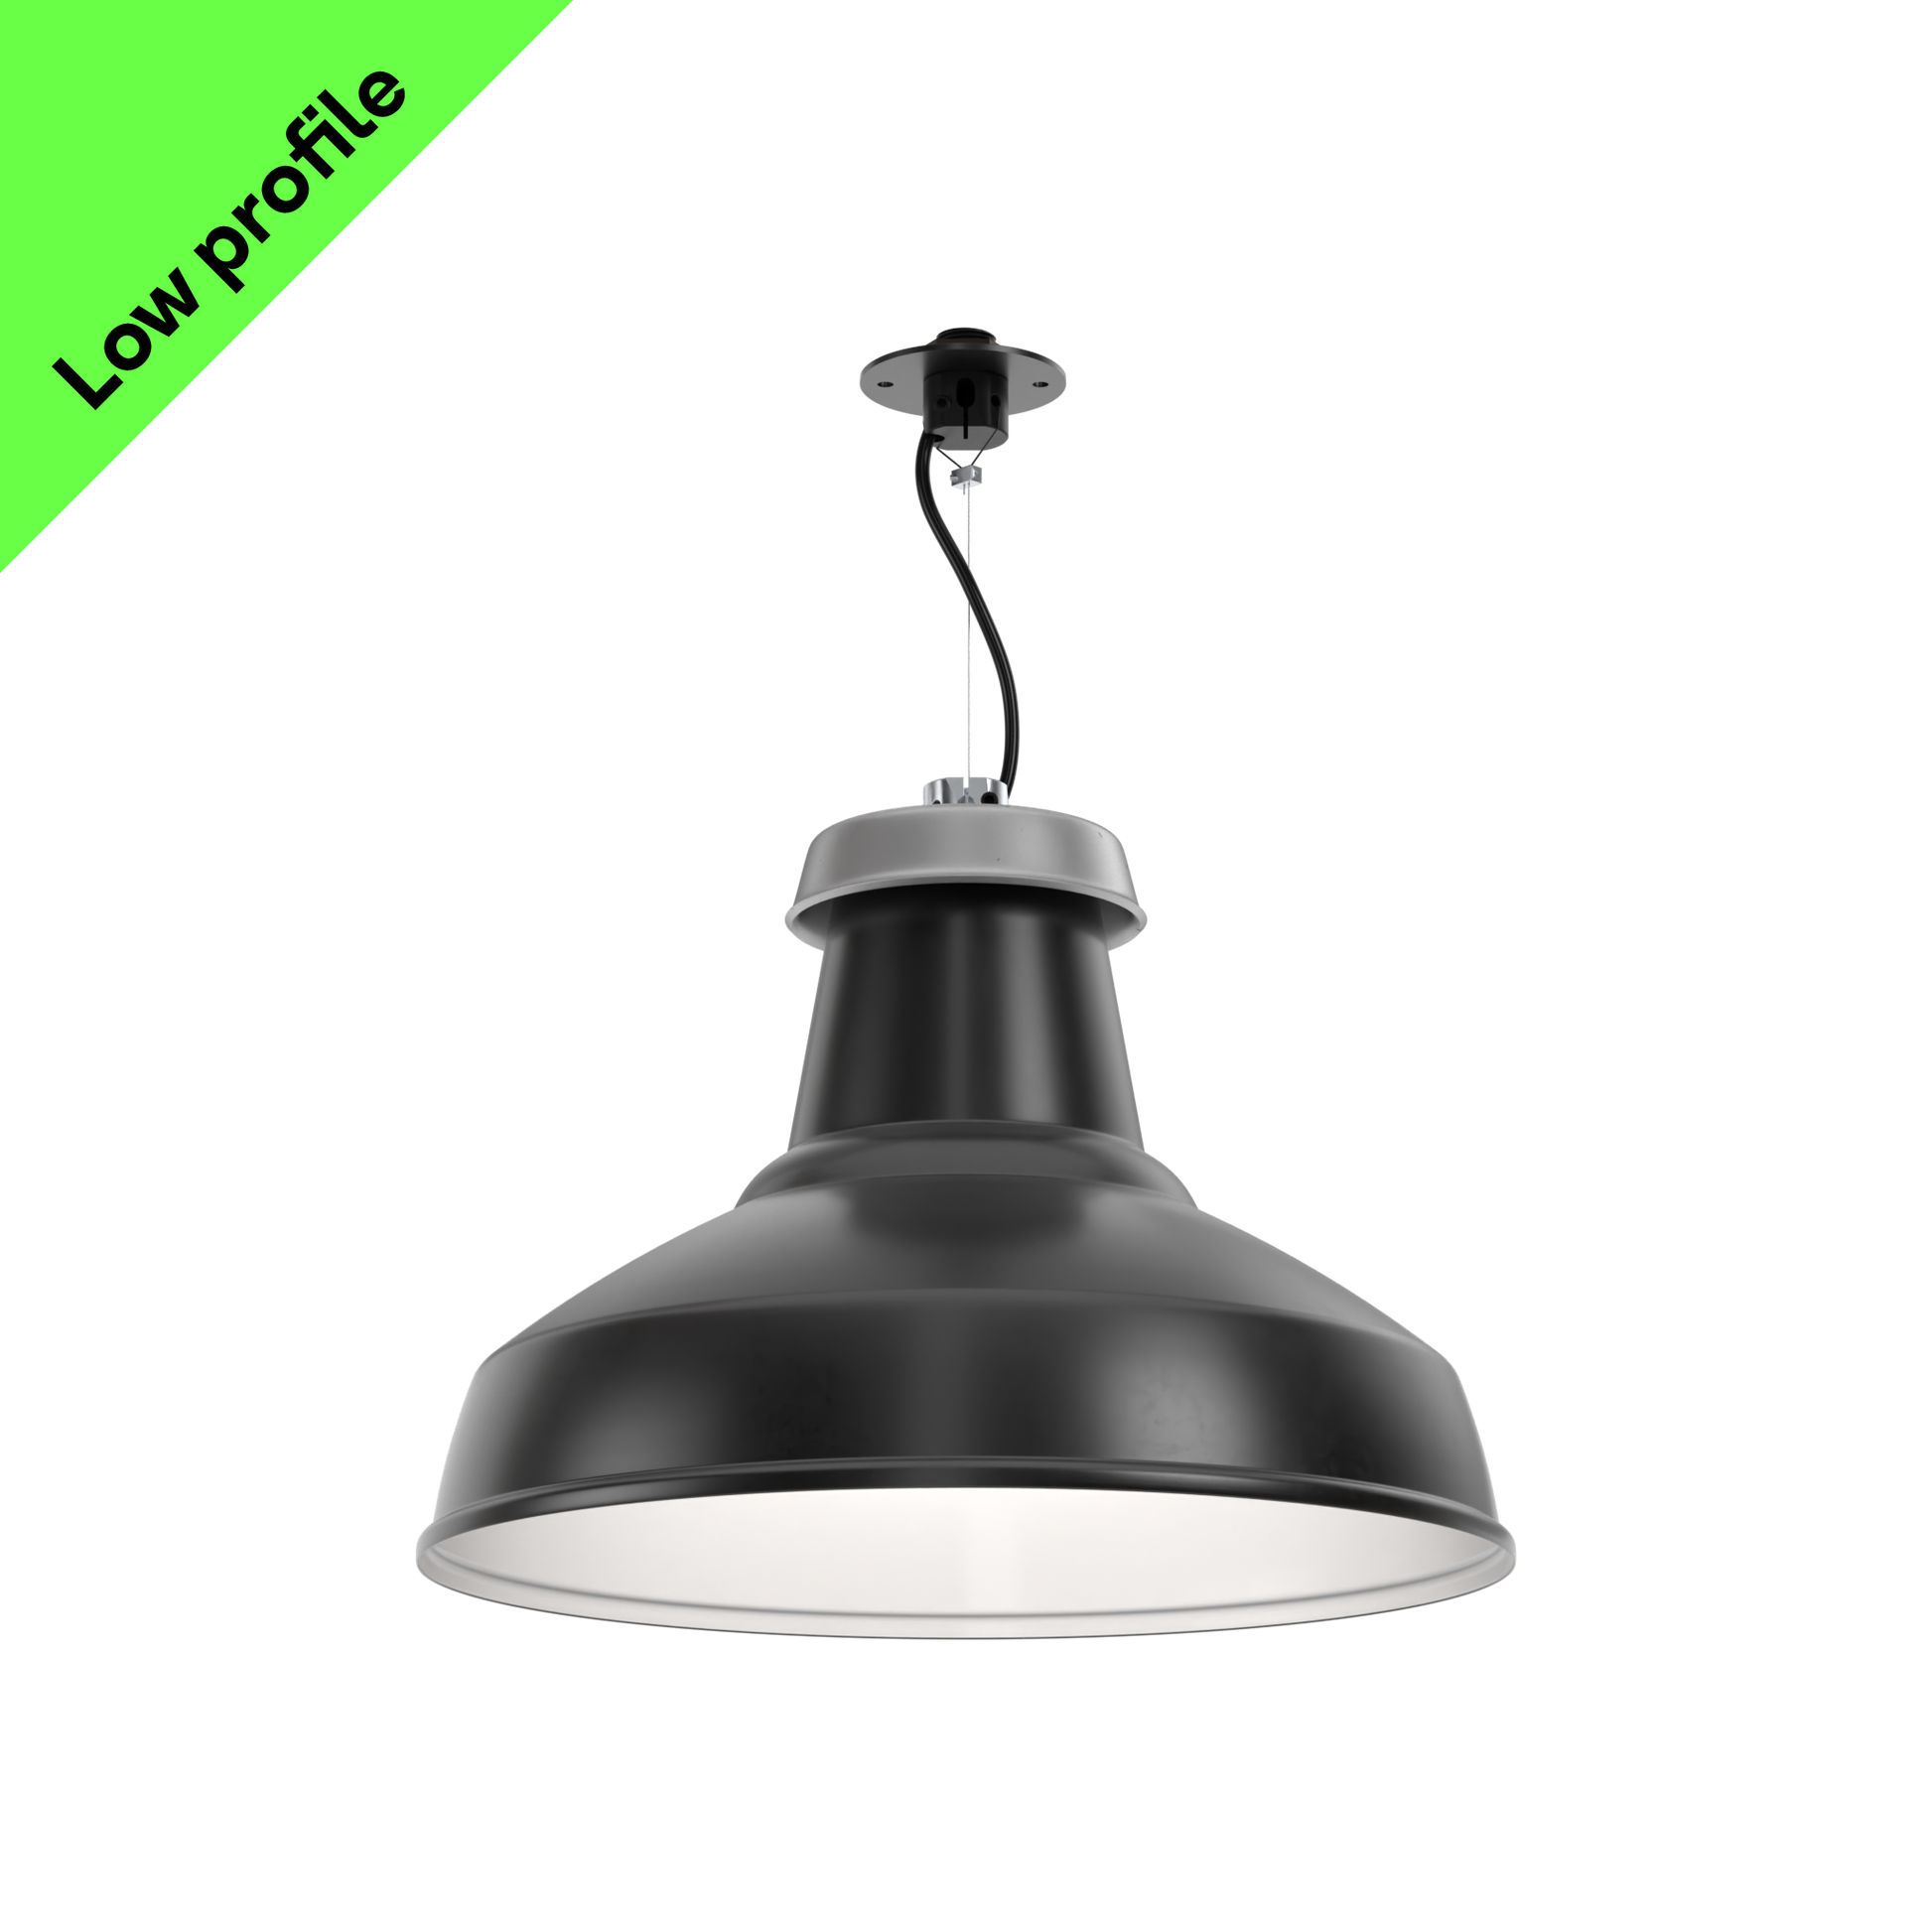 A sustainable, black, architectural pendant light that's designed for circular economy, on a low-profile mounting disc